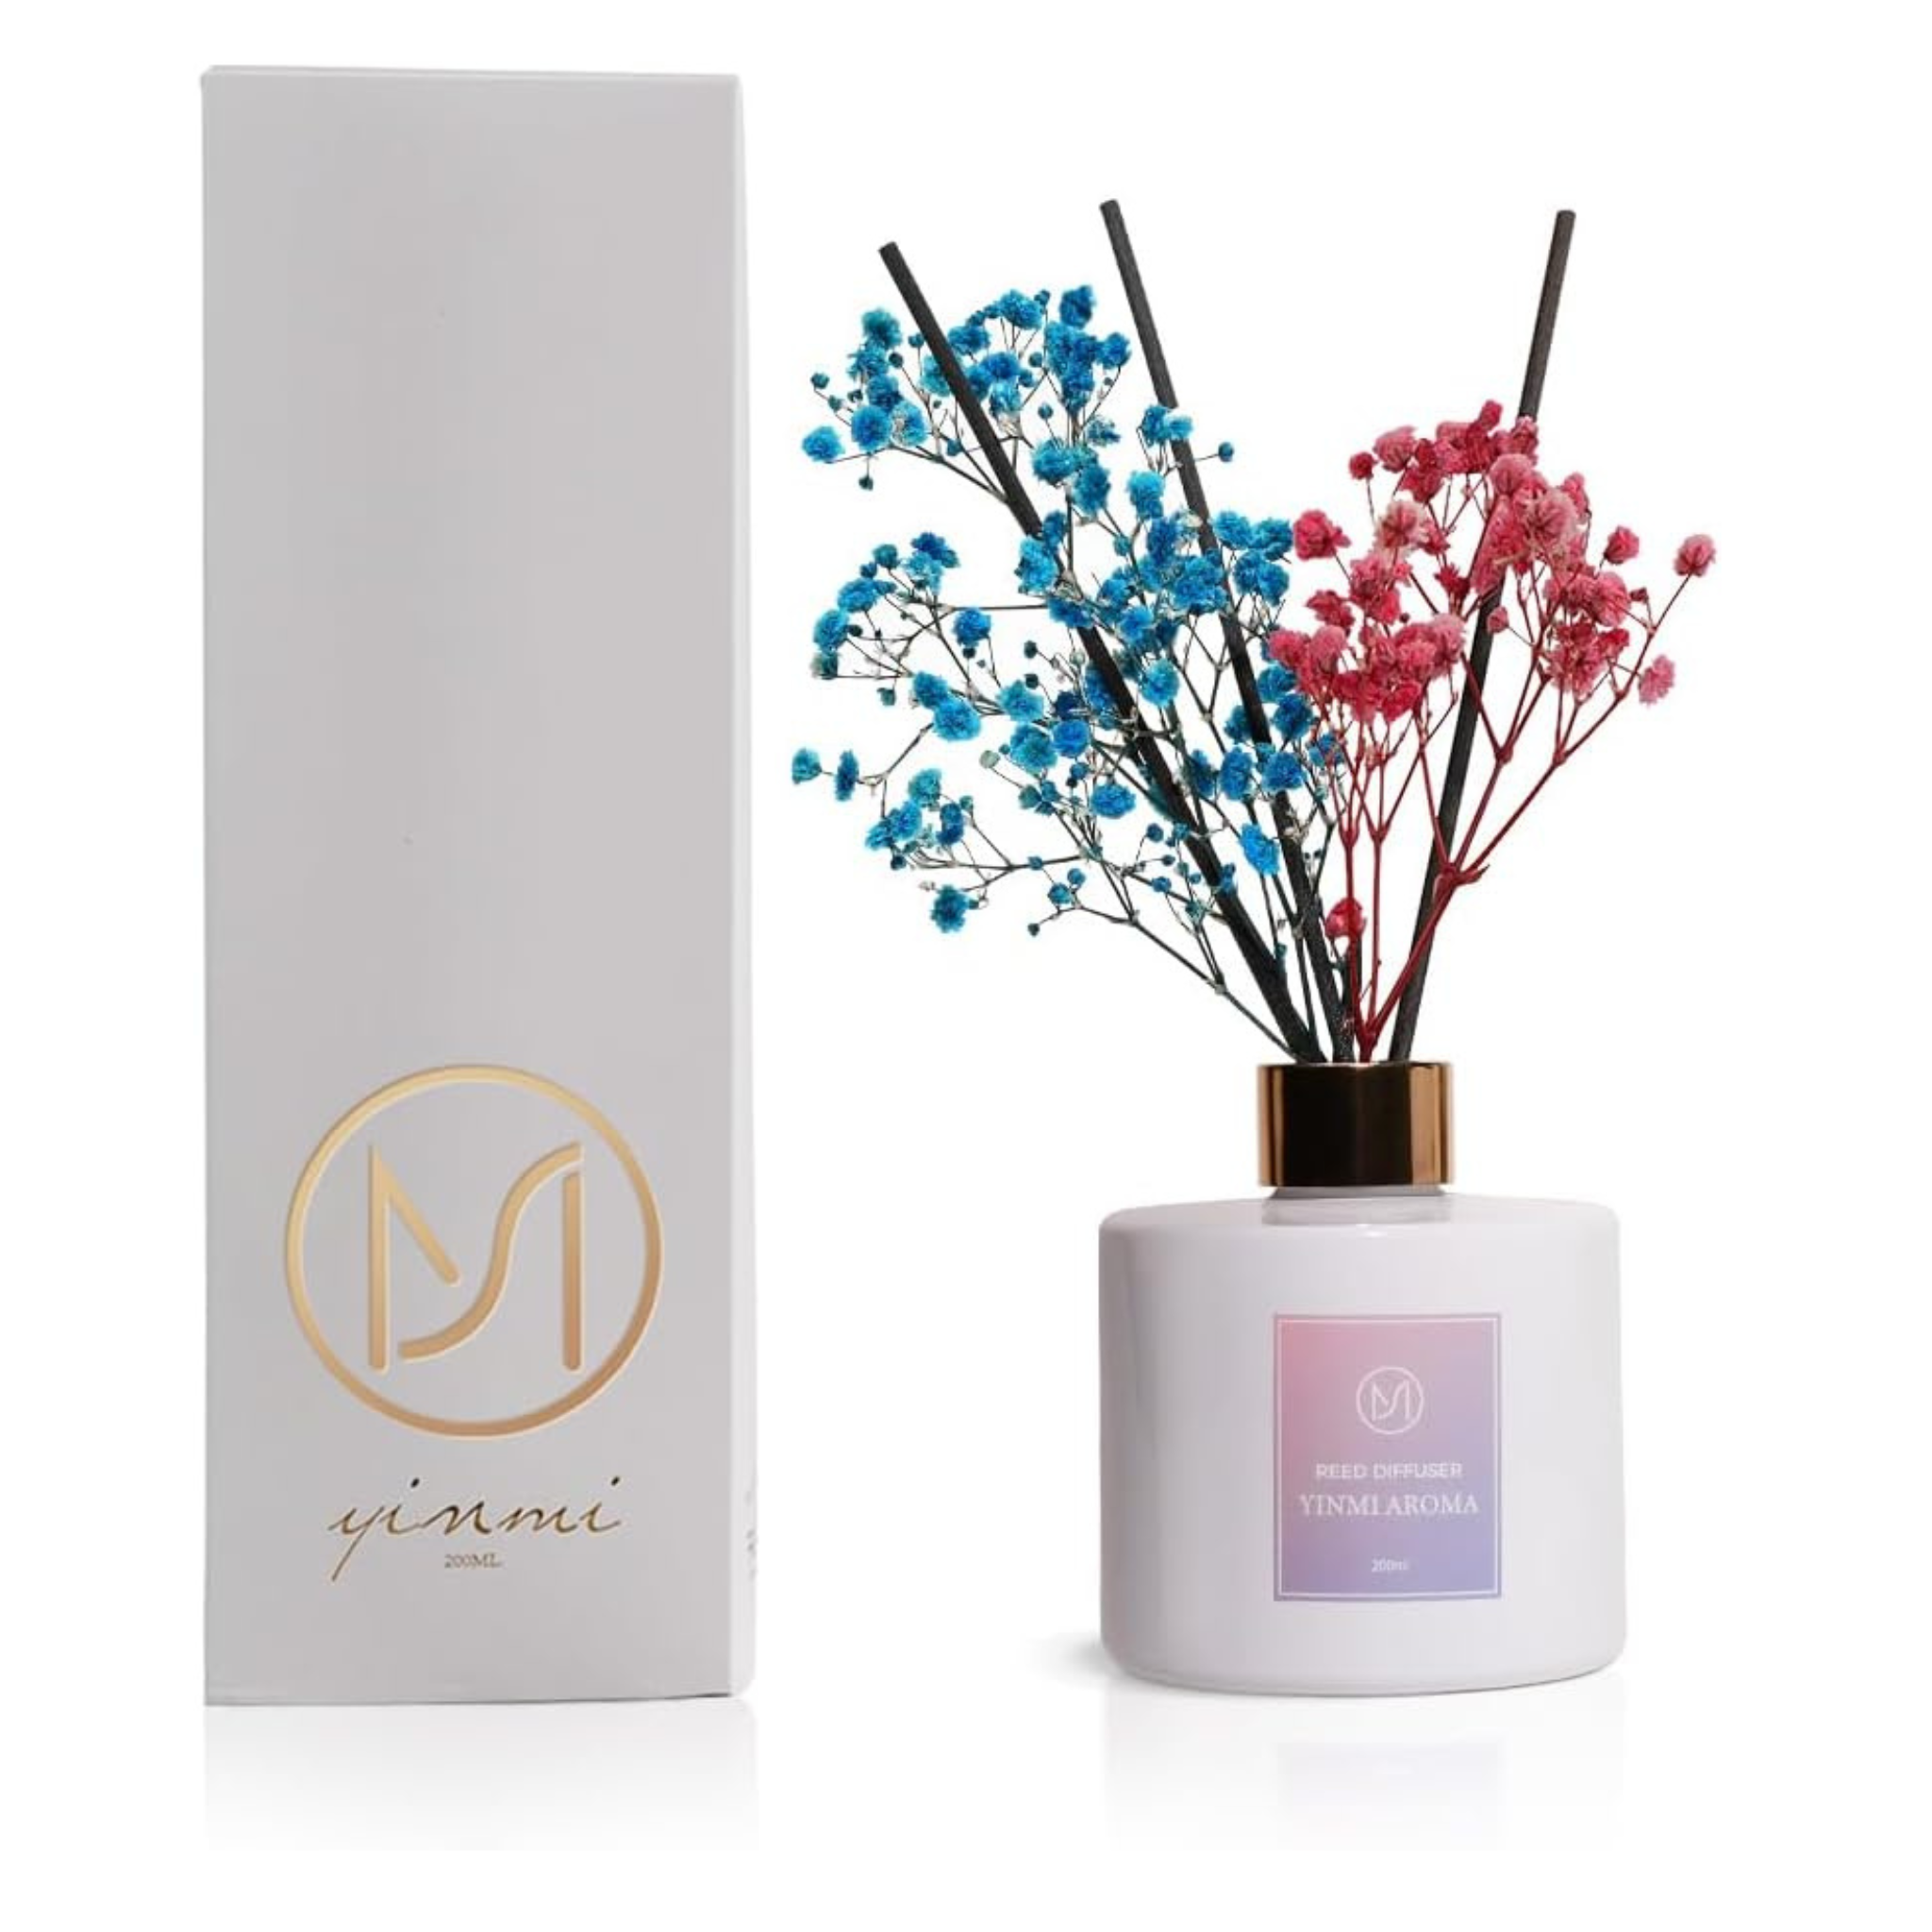 Gardenia Scented Reed Diffuser Set